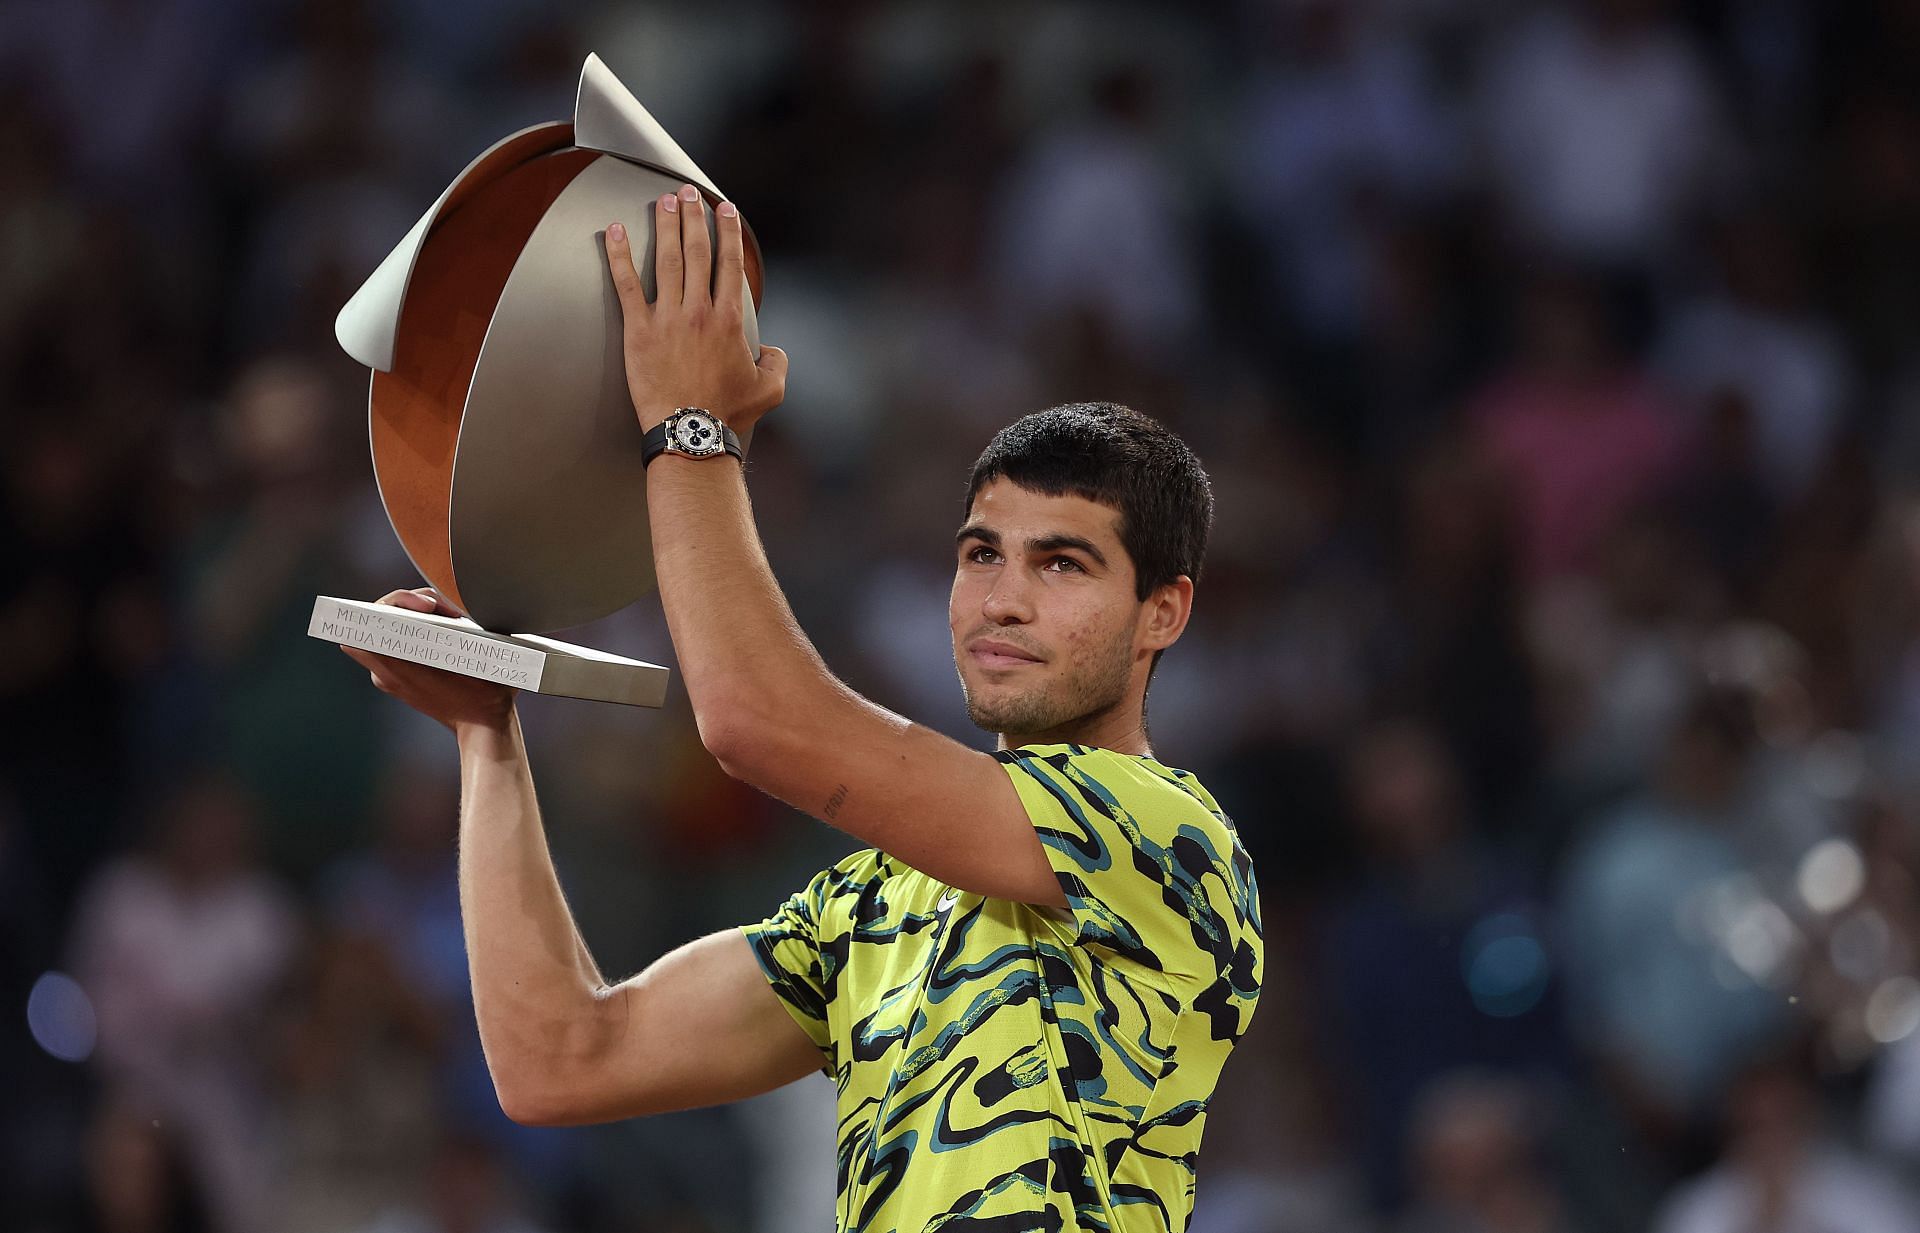 Carlos Alcaraz is the two-time defending champion at the Madrid Open.